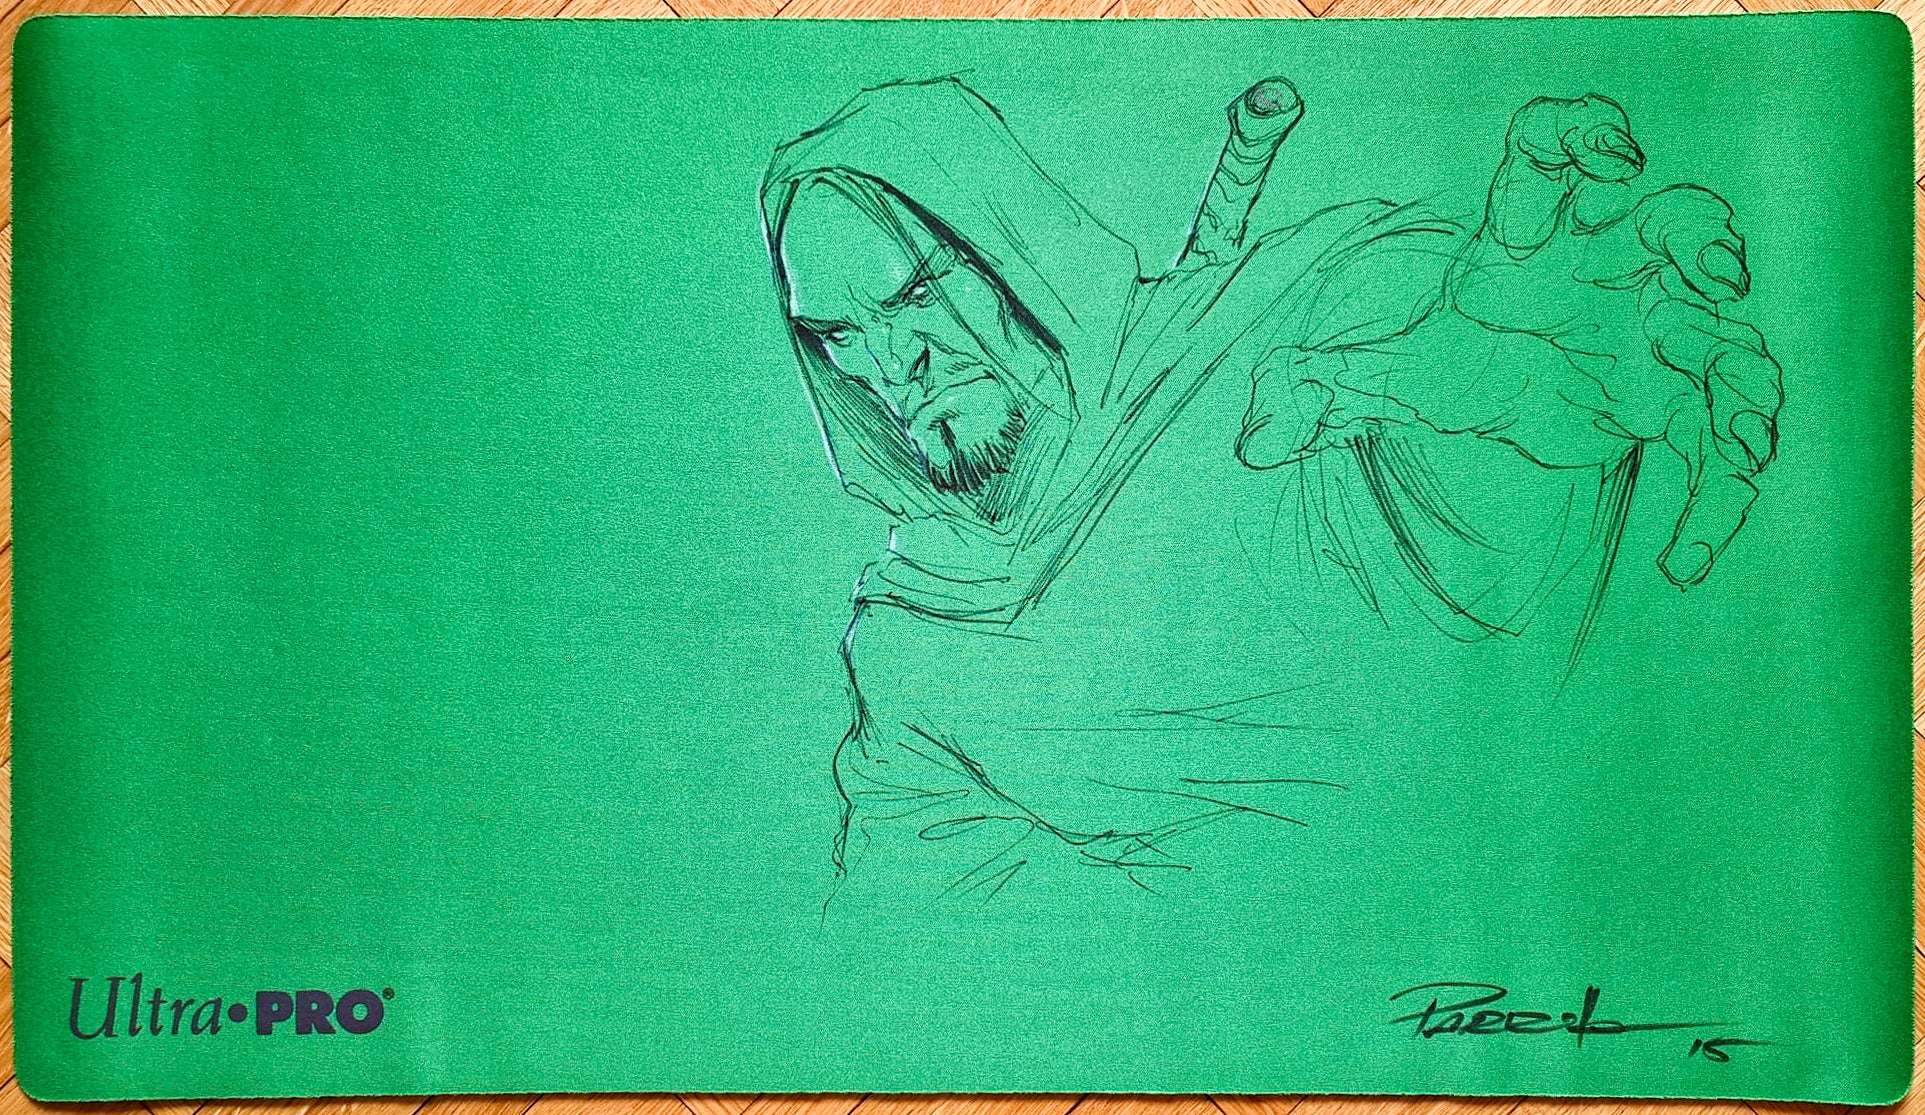 Baru, First of Krosa [Reimagined] - Lucio Parrillo - Hand Drawn & Signed by the Artist - MTG Playmat